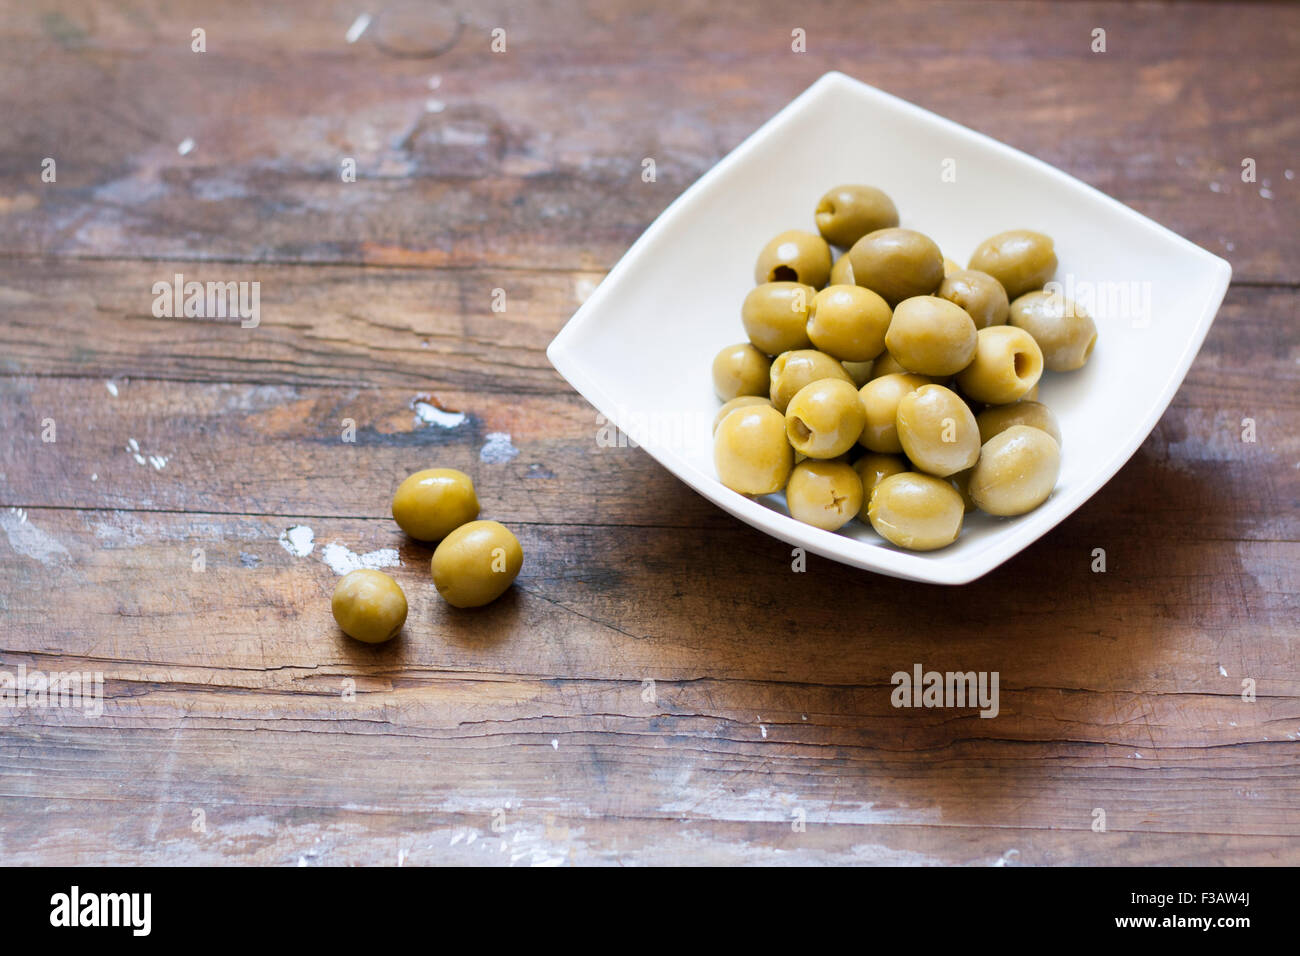 Green olives in marinade Stock Photo